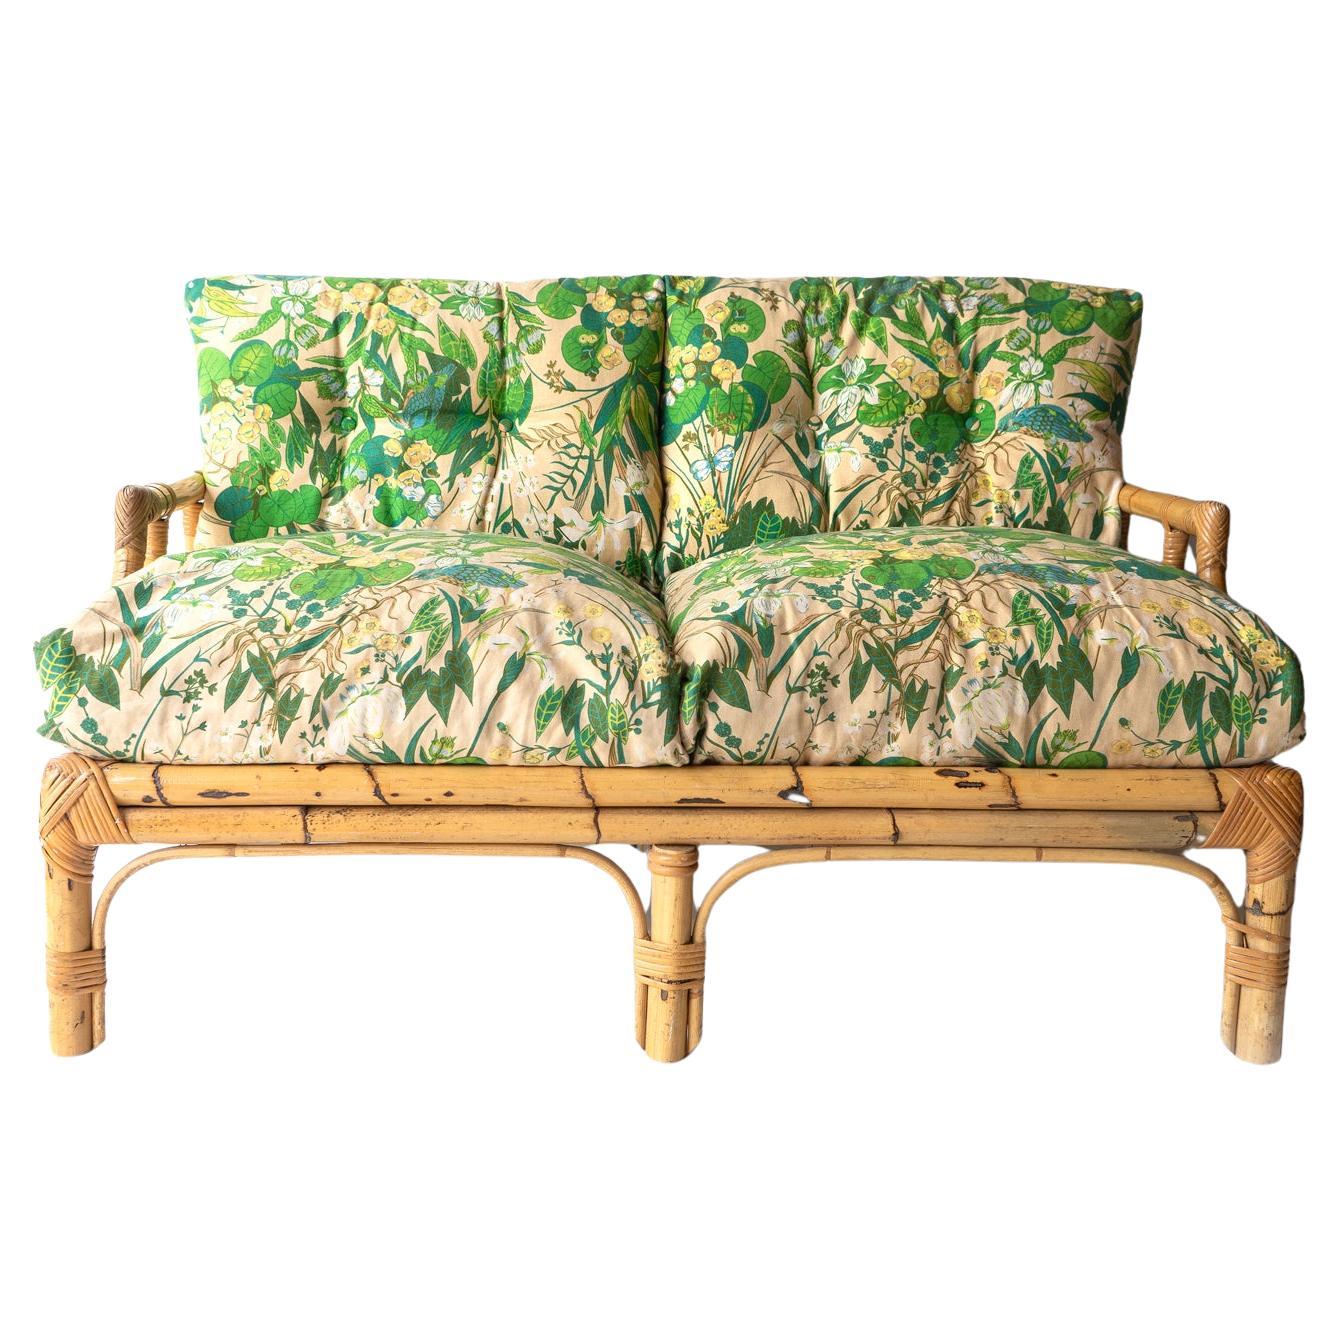 Vintage Italian Floral Upholstered Bamboo And Rattan Sofa By Vivai Del Sud 1970s